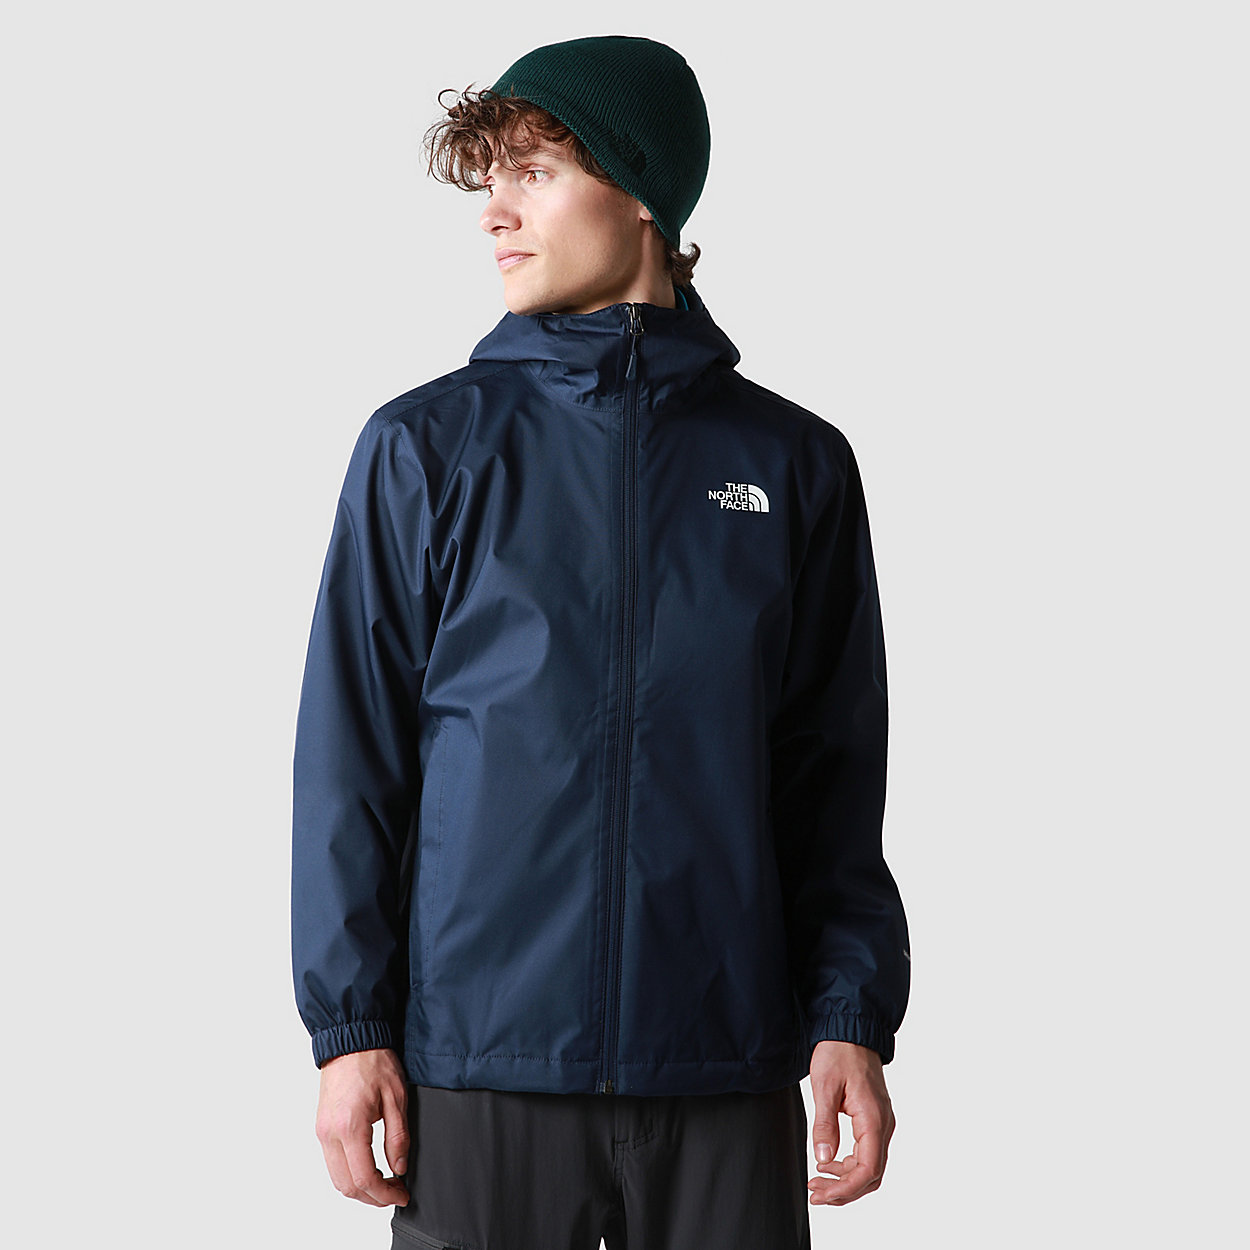 Unlock Wilderness' choice in the Mountain Warehouse Vs North Face comparison, the Quest Hooded Jacket by The North Face